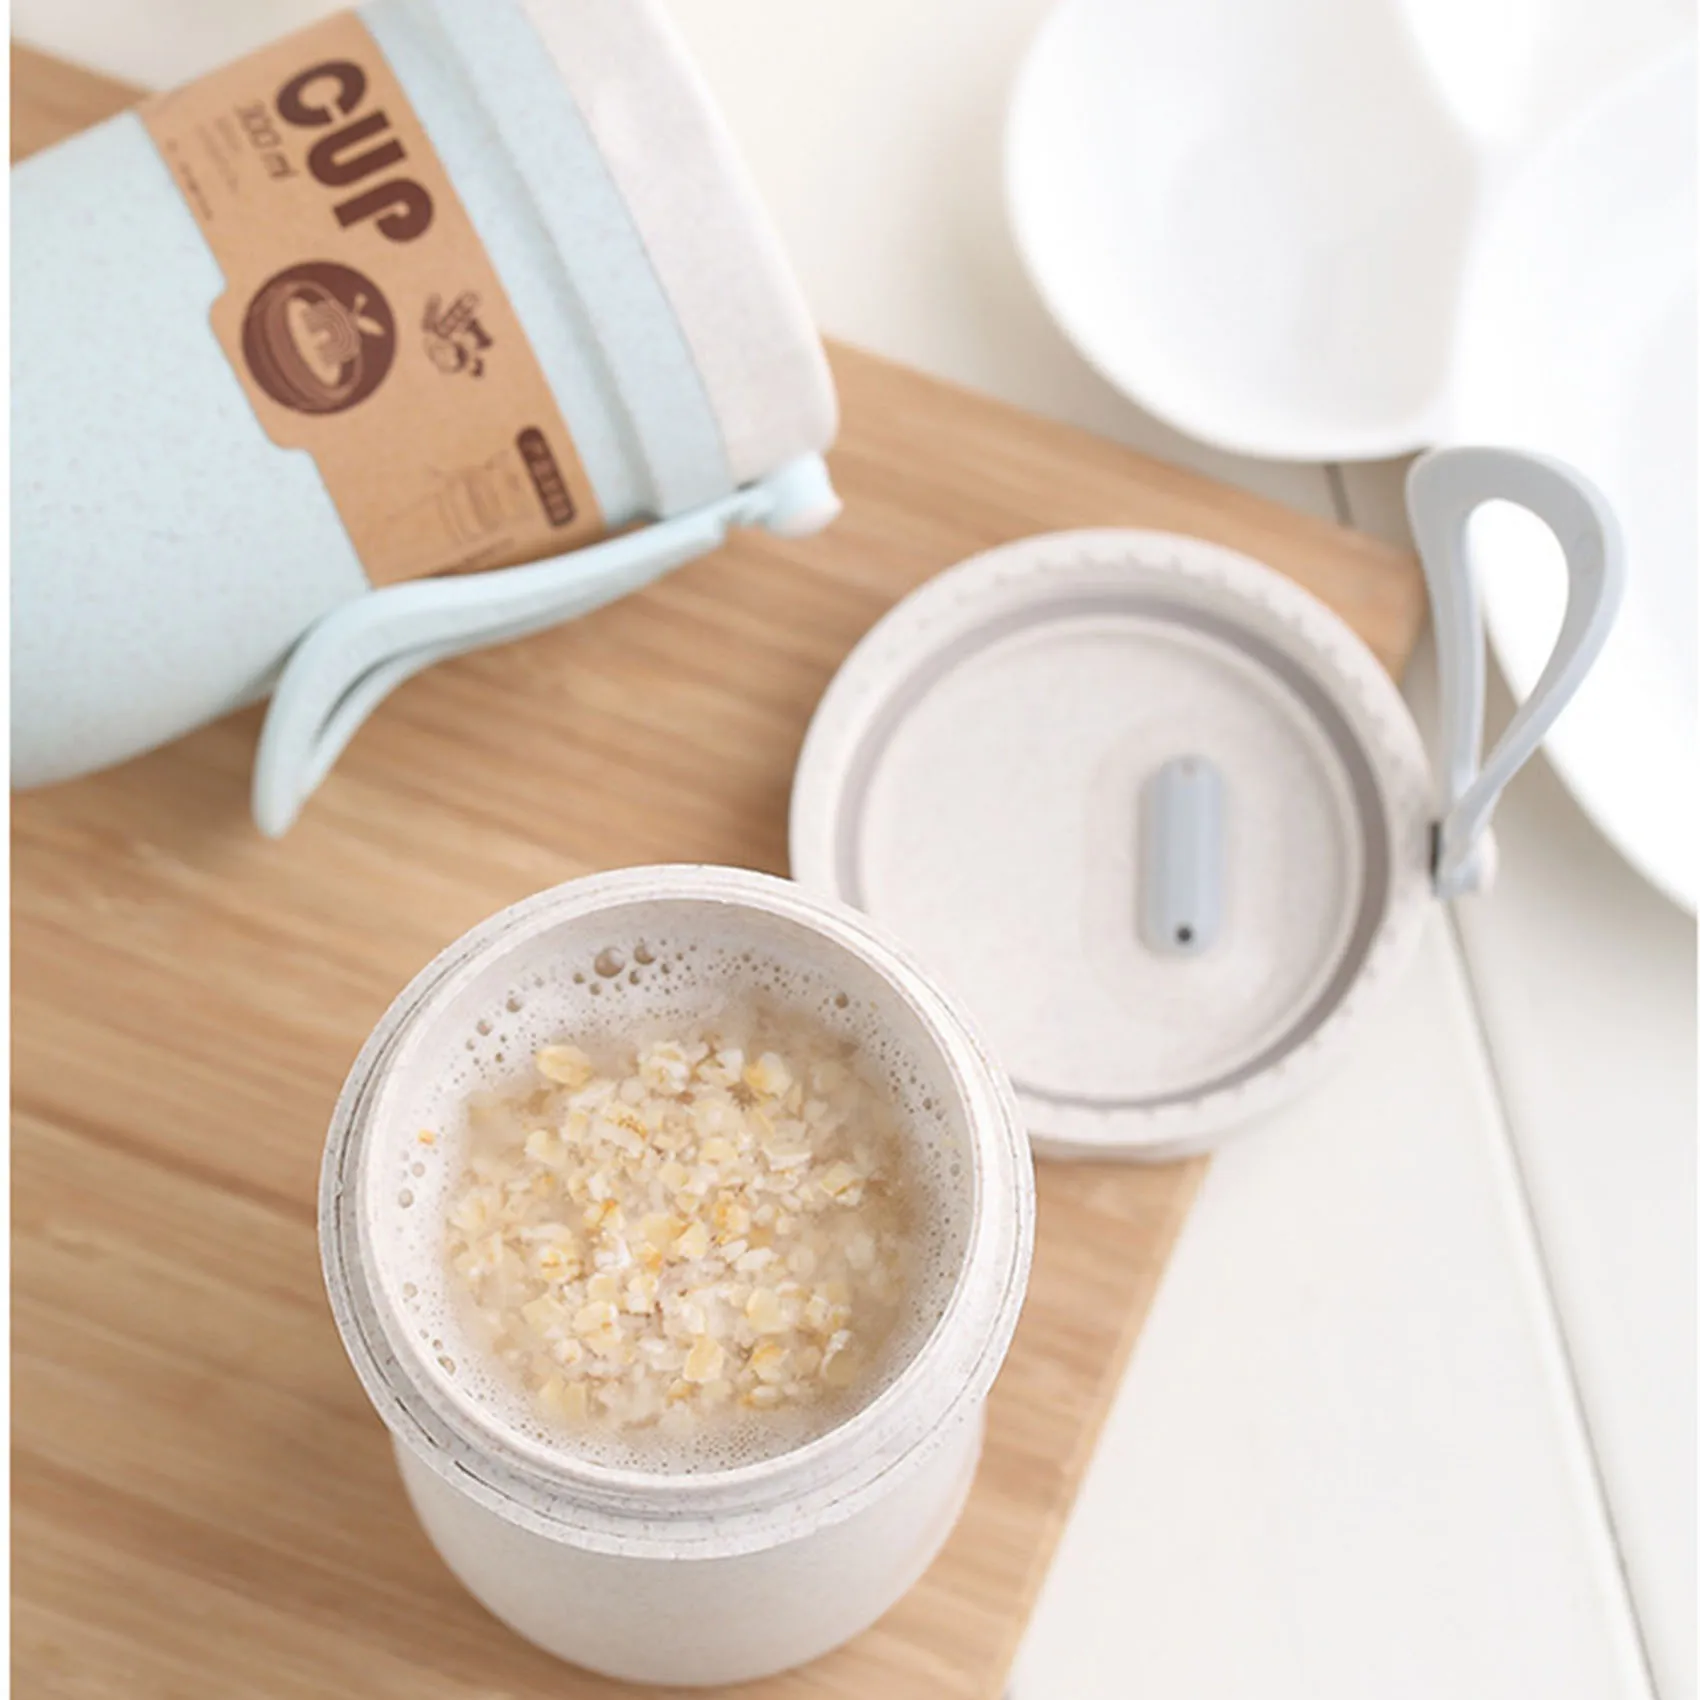 2023 Hot sell Kitchen accessories Wheat Straw Cup Travel Mug 300ml Reusable Coffee Cup With spoon Lid Portable breakfast cup